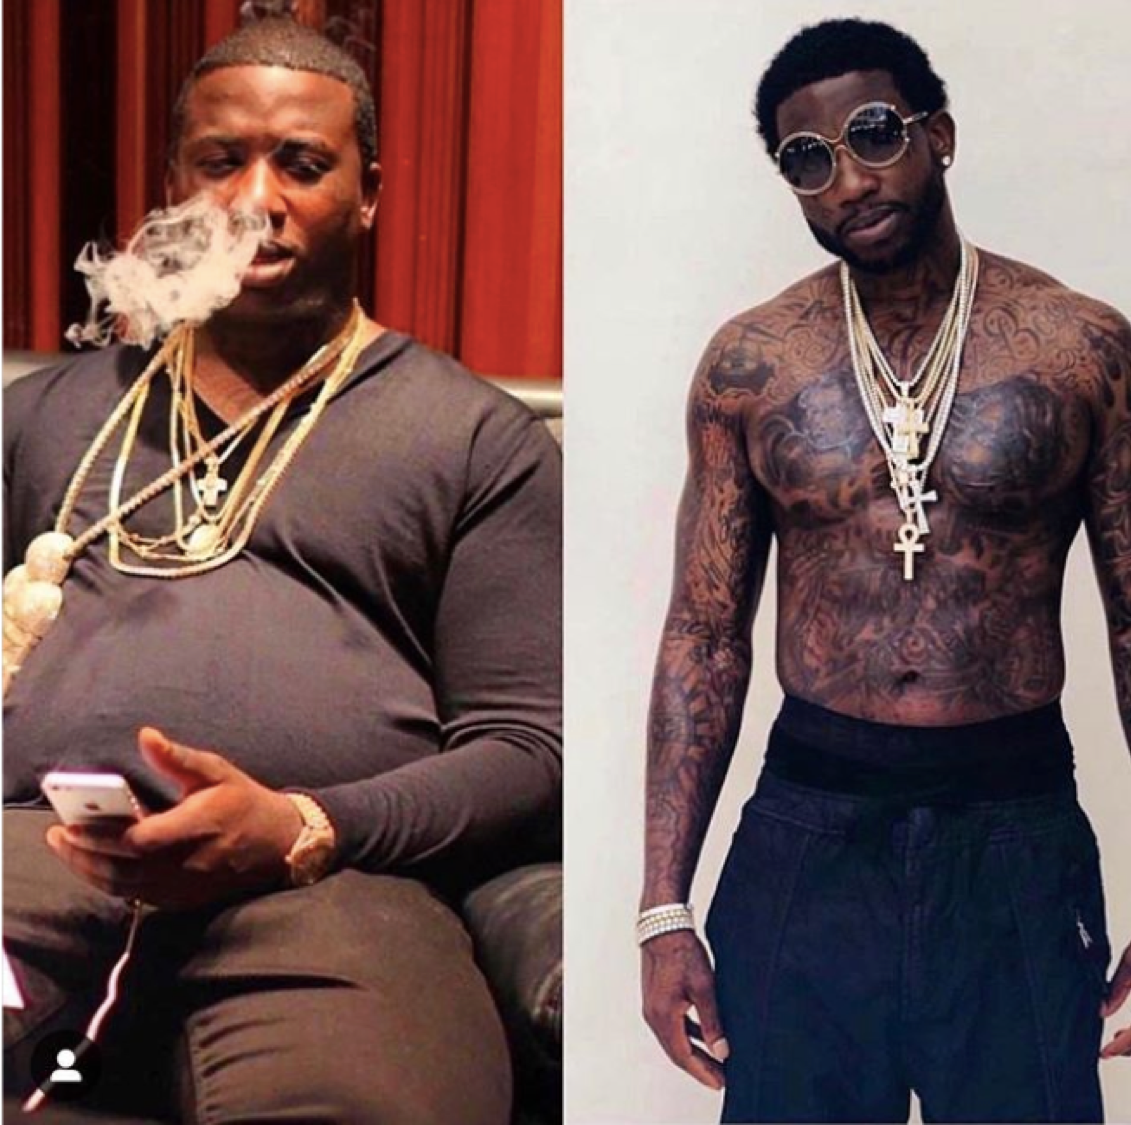 It Looks Like Gucci Mane's Release Date Has Been Moved Up to This